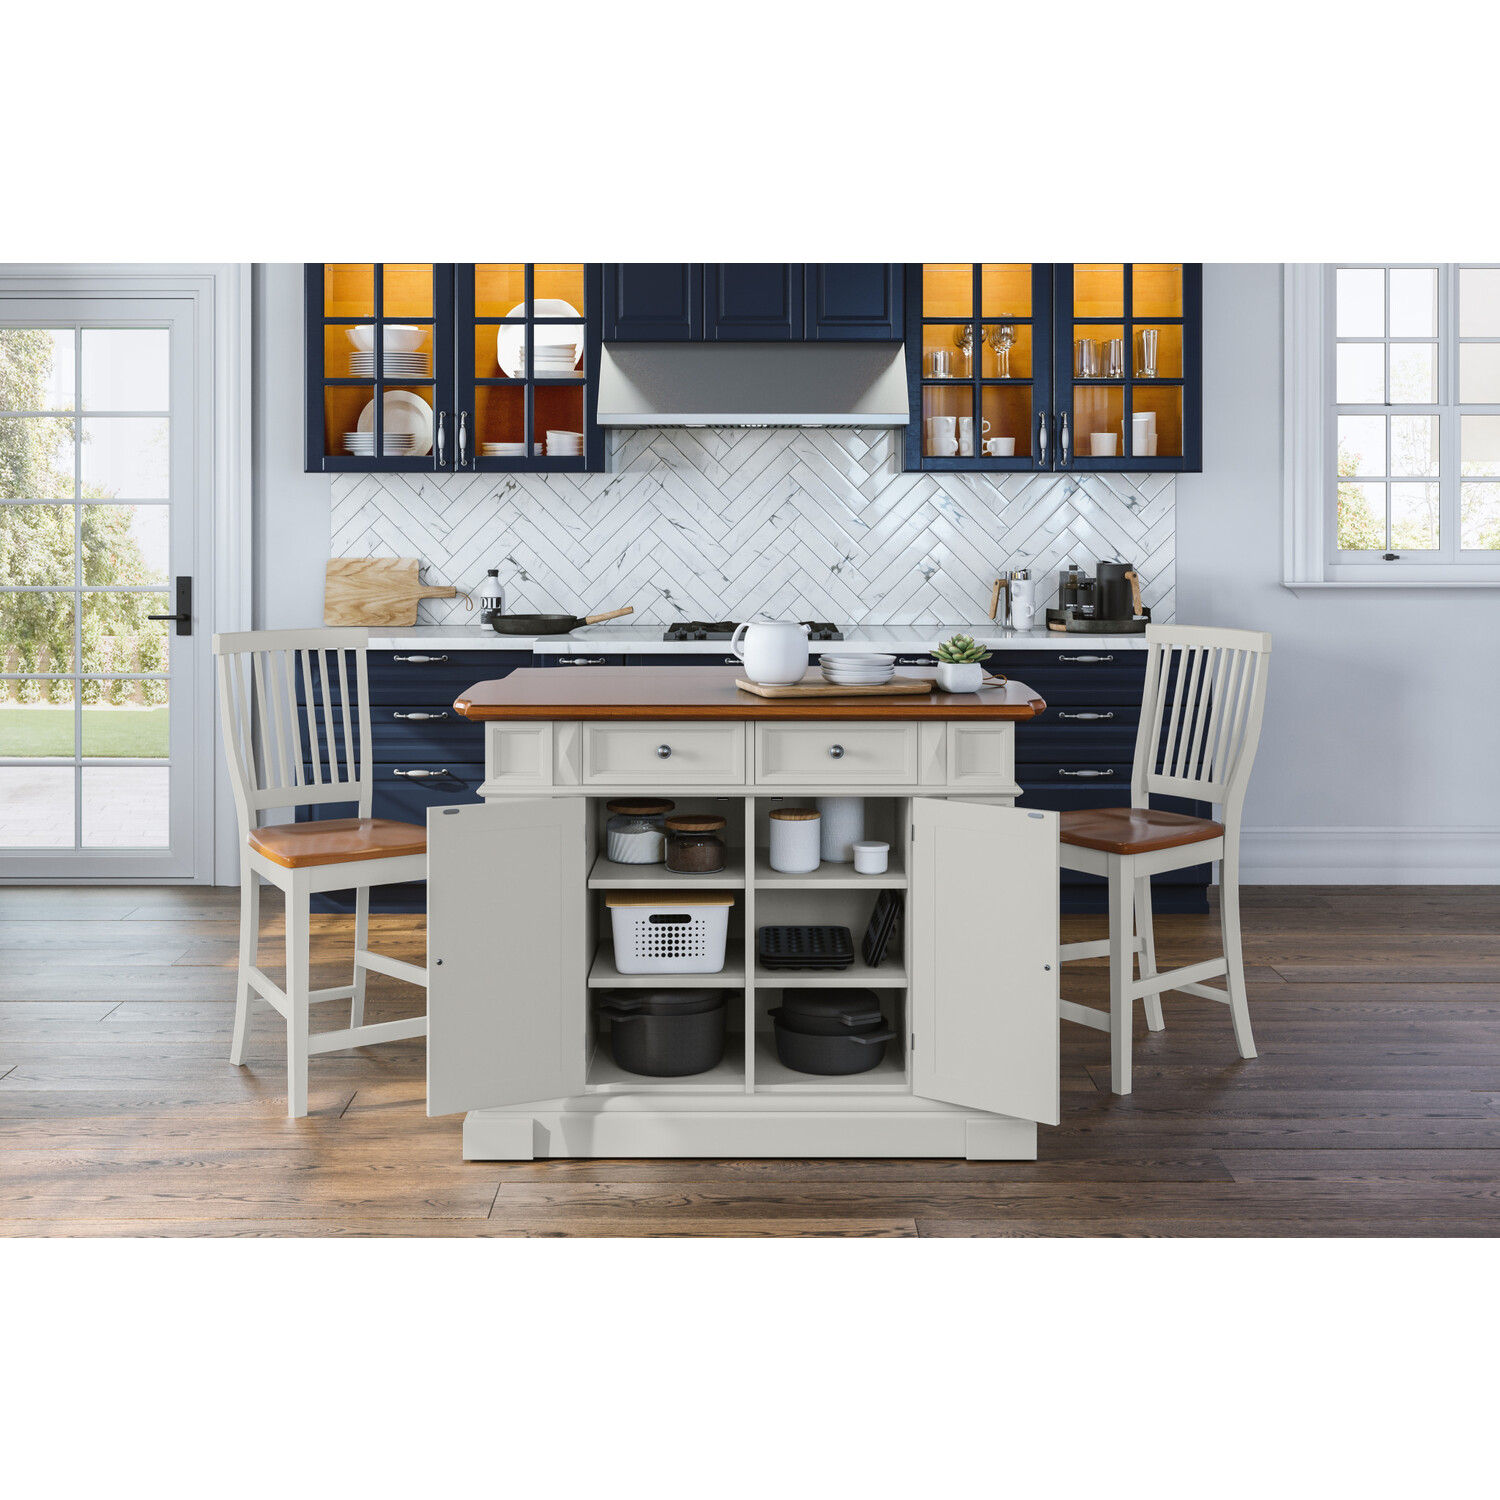 Homestyles Americana Wood Kitchen Island Set in Off White - image 5 of 7